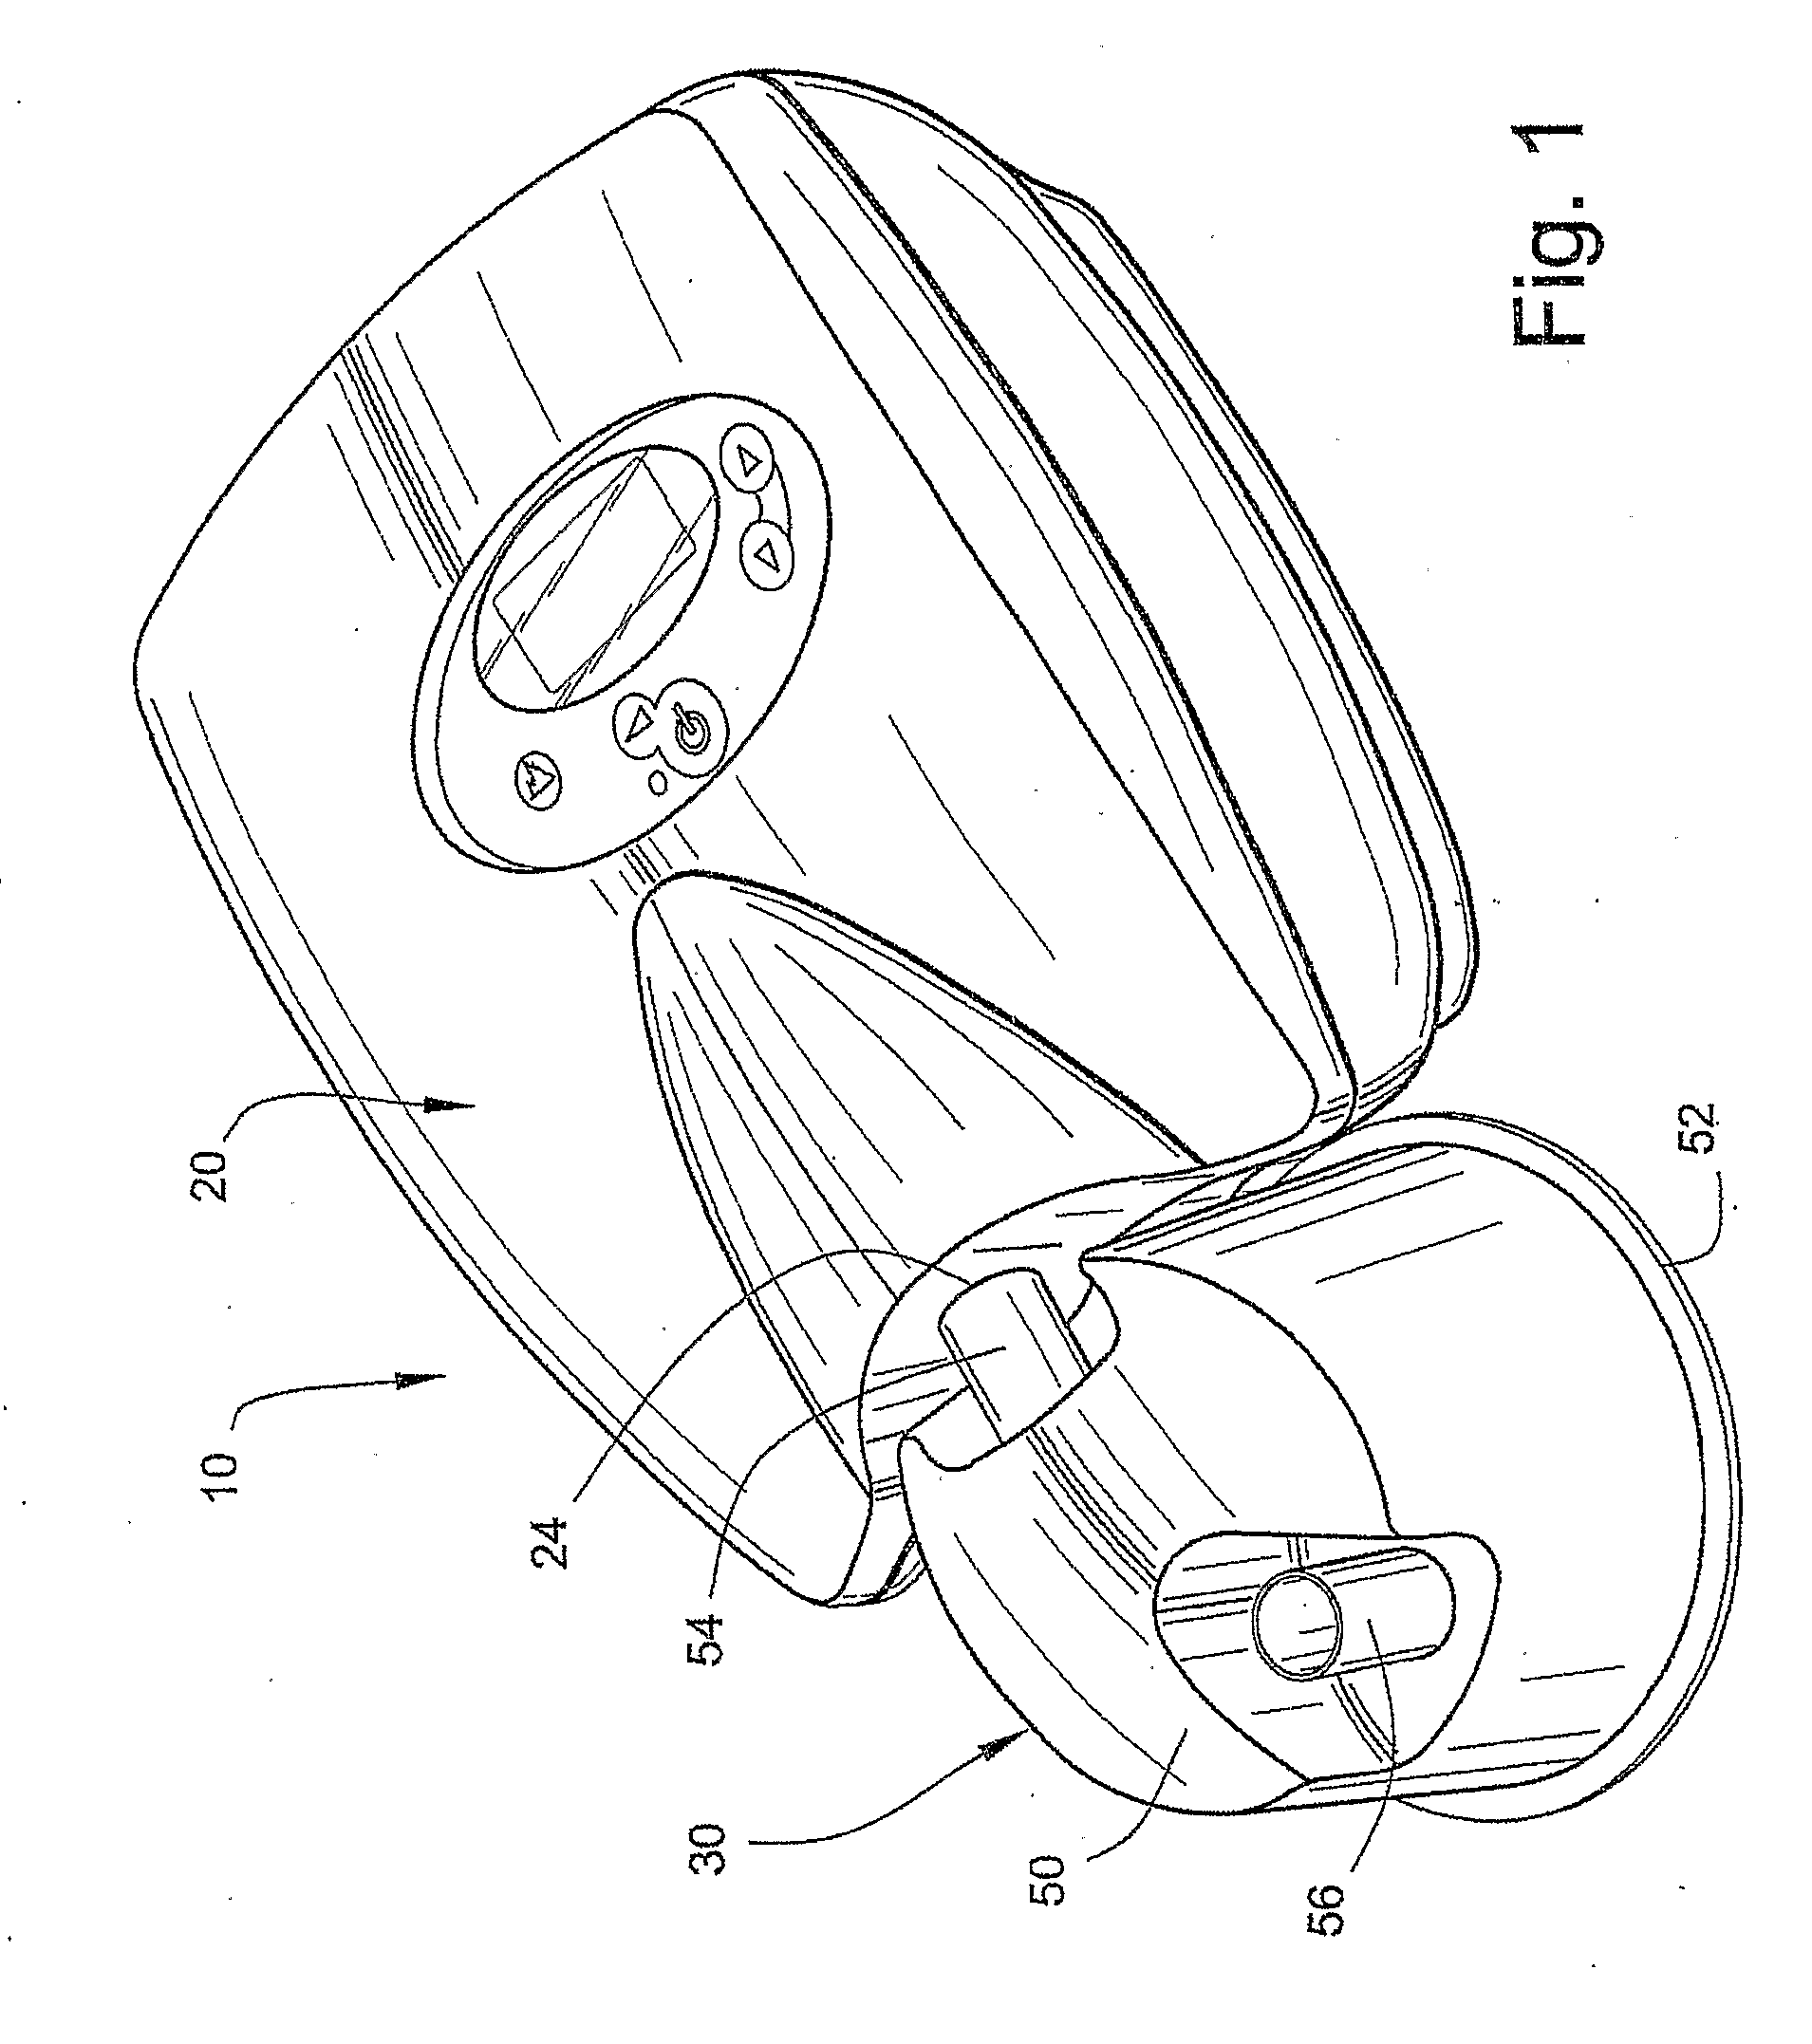 Humidifier and/or flow generator for CPAP device